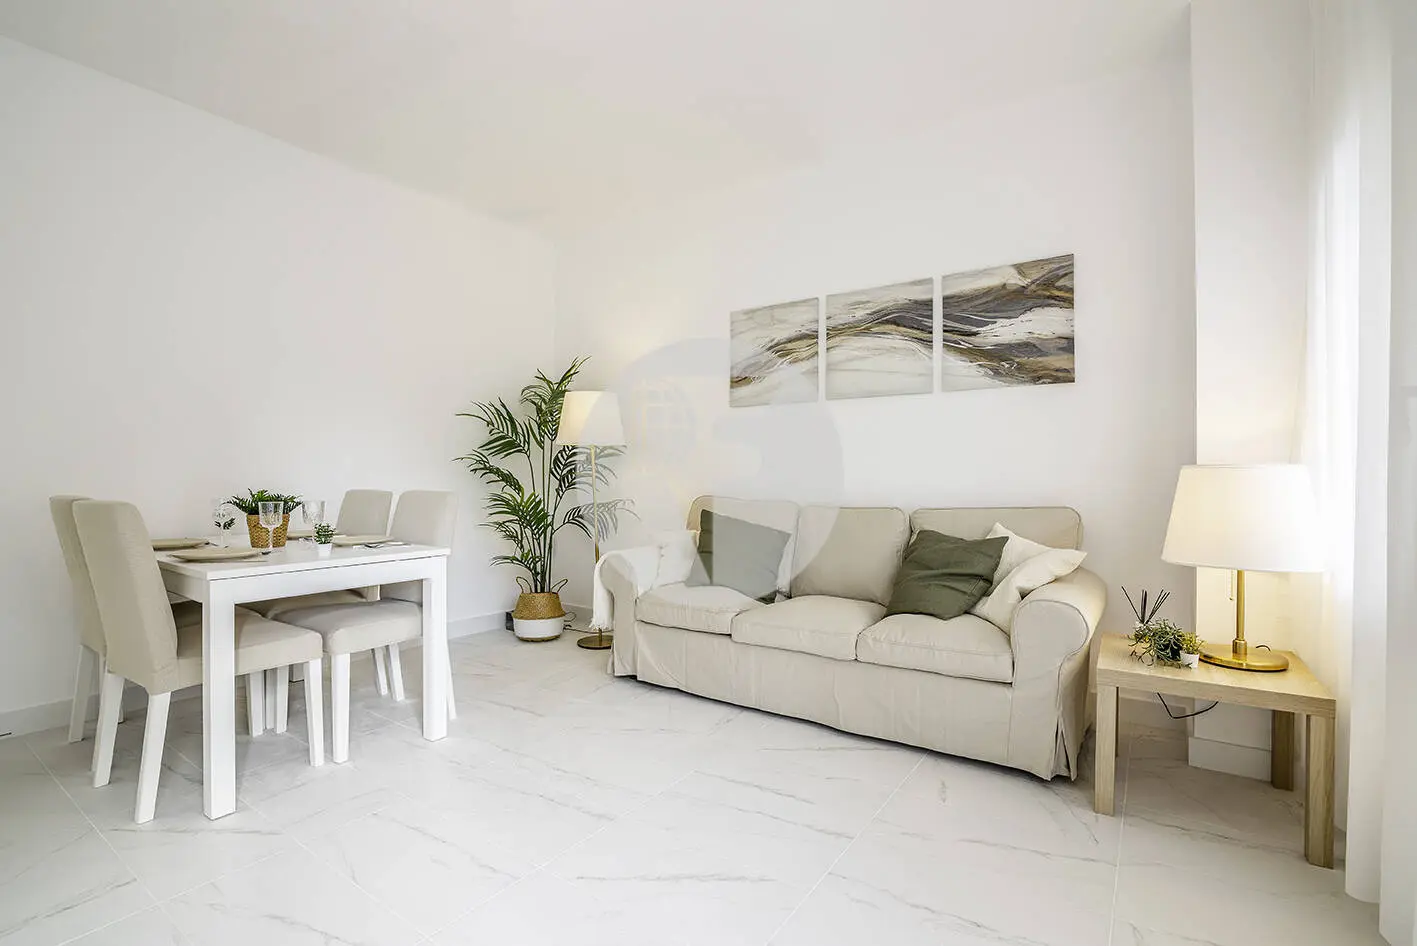 Brand new completely renovated apartment on Aragó street in the heart of El Clot in Barcelona. 4